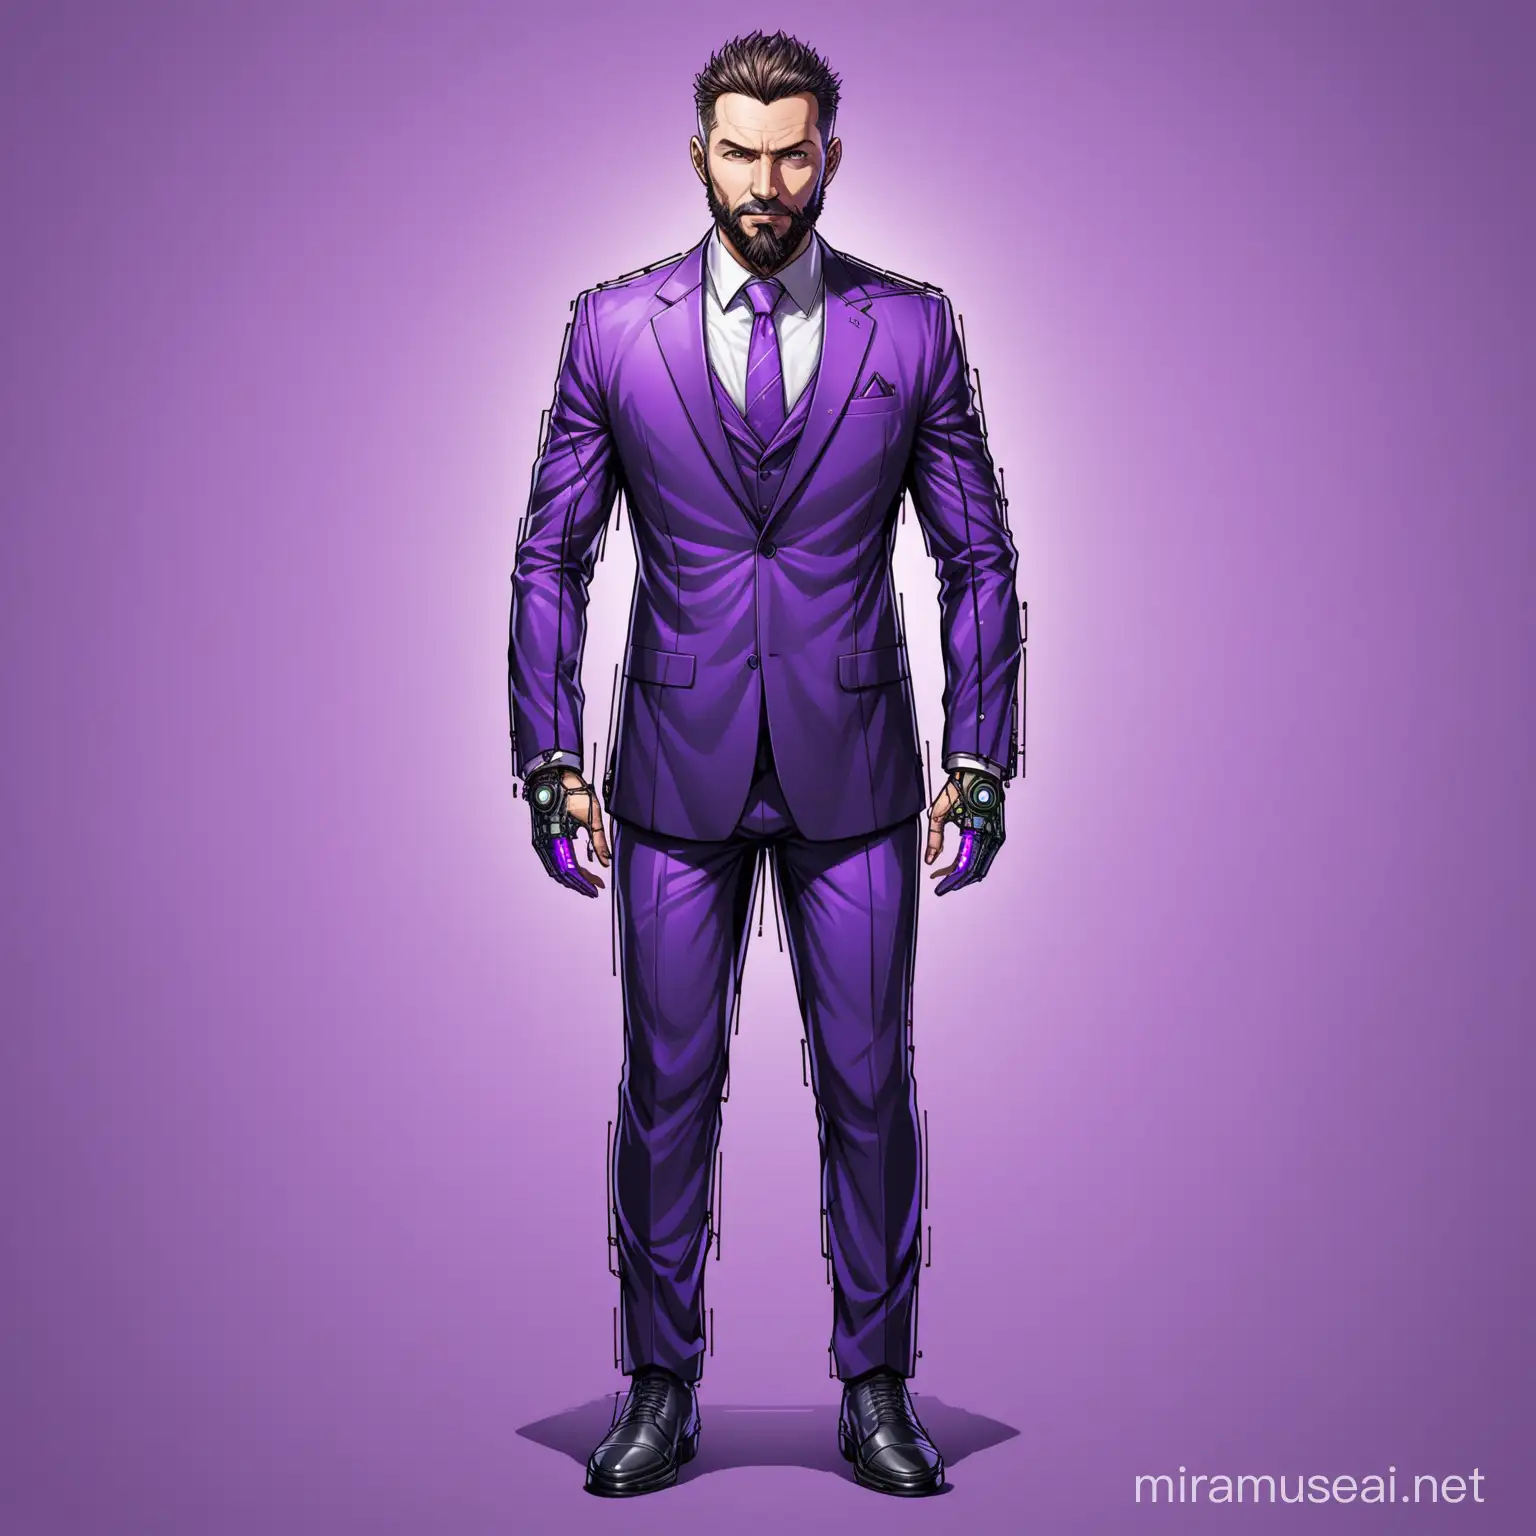 
Create a full body portrait for a cyberpunk corporate executive character looking like Lieb Schreiber with implants threading and a short beard wearing a corporate suit with violet touches